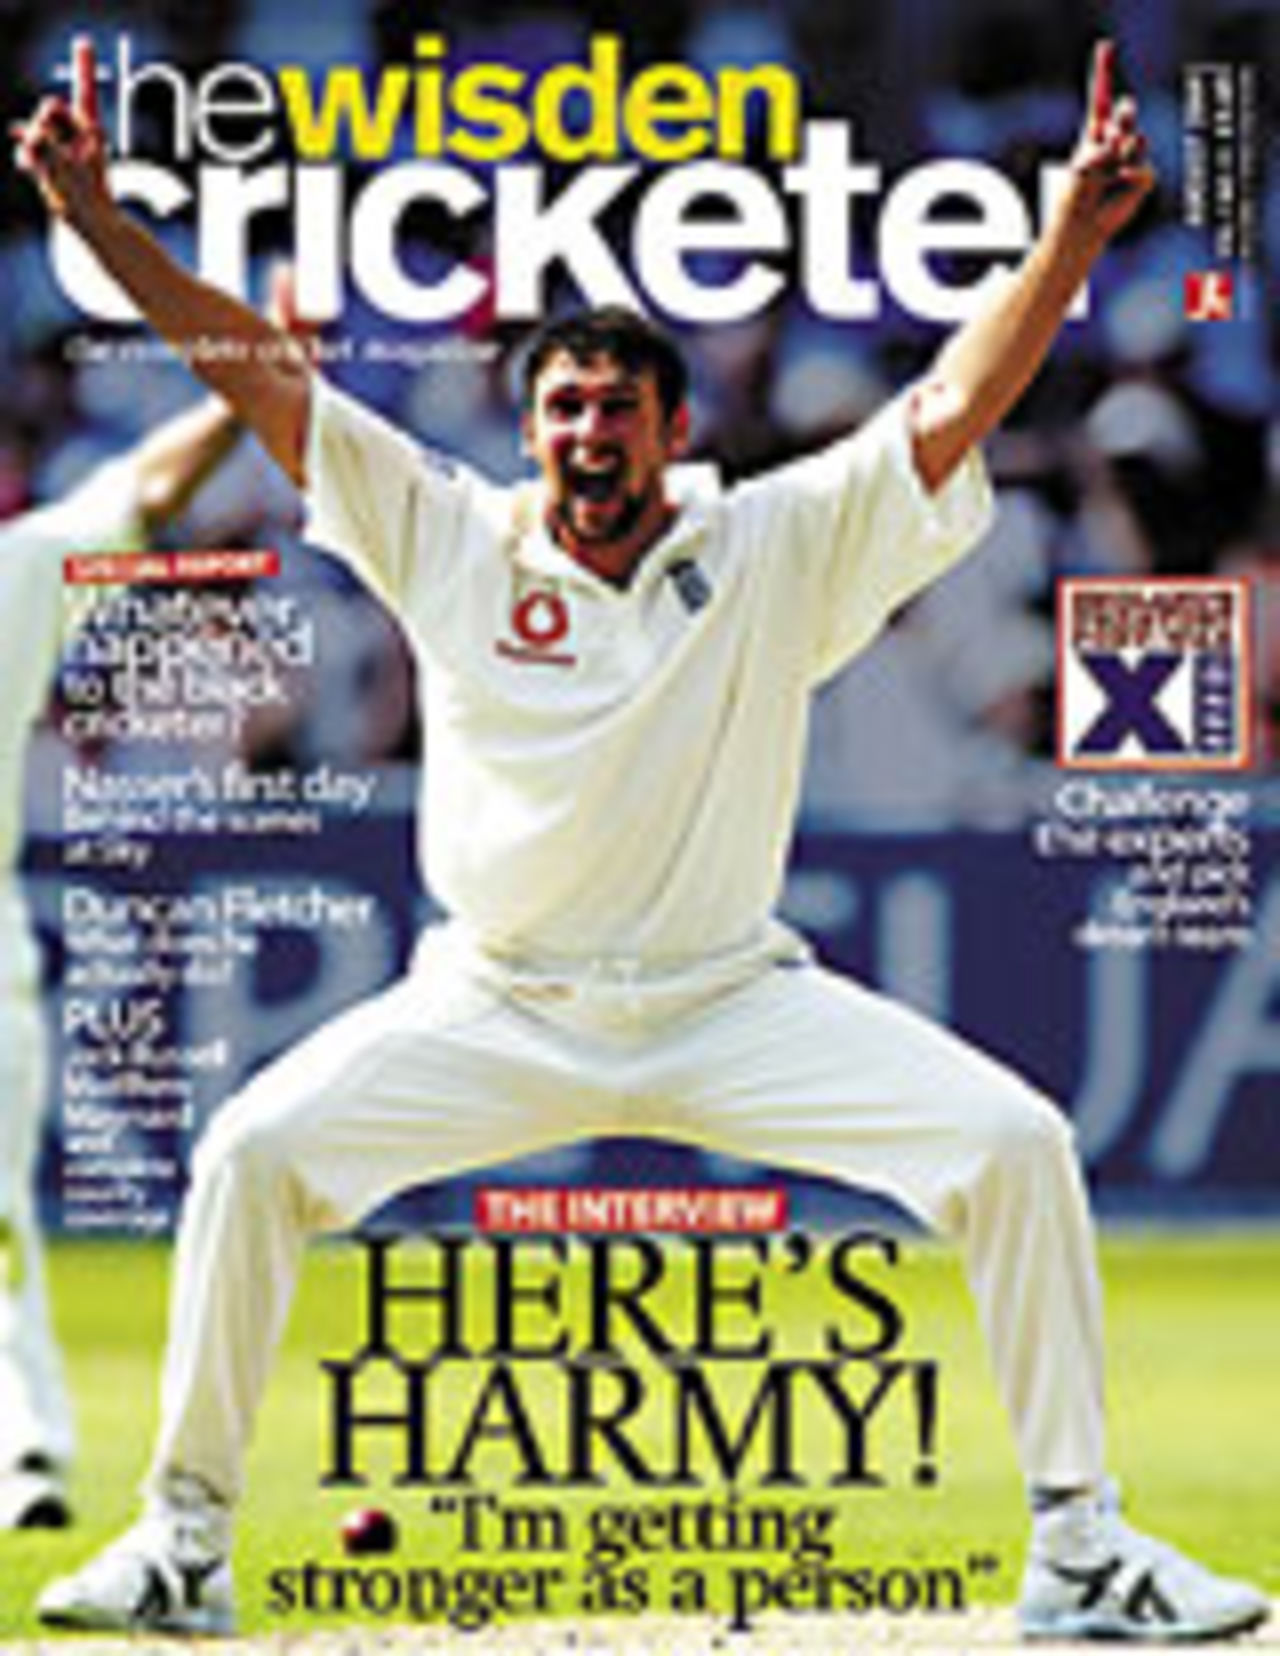 The Wisden Cricketer August cover